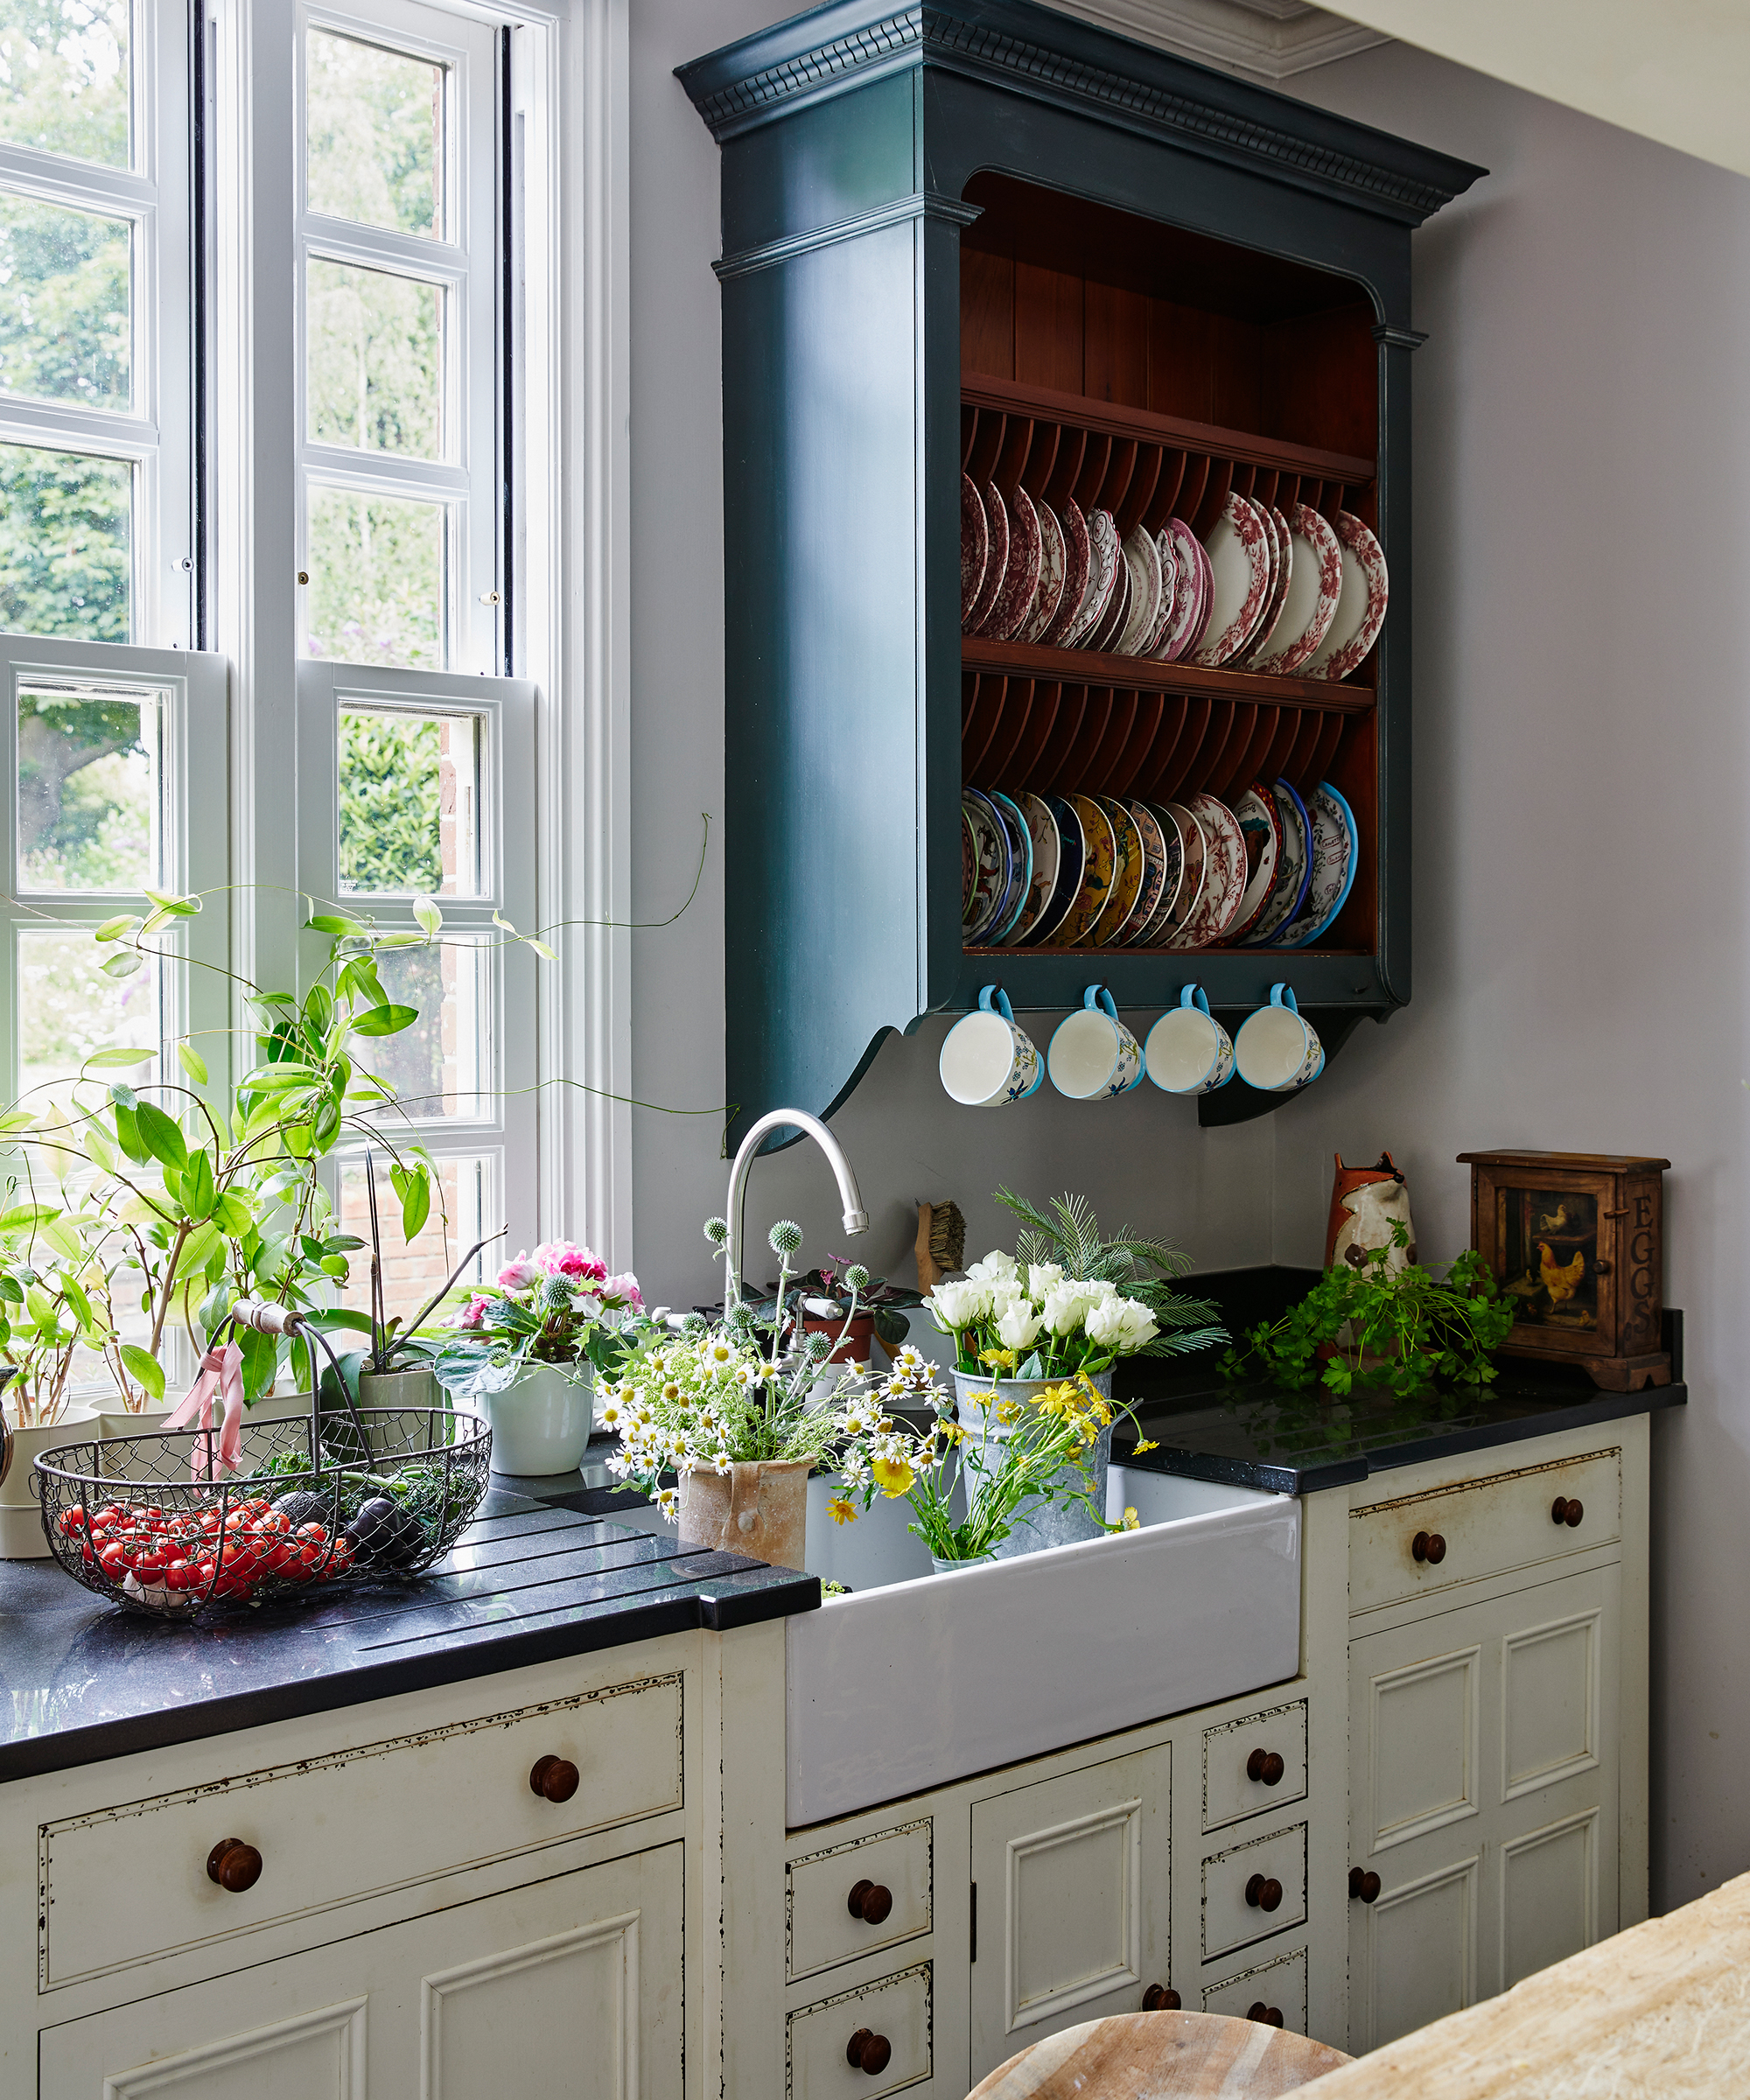 sink in country kitchen by window filled with flowers with wall plate rack beside